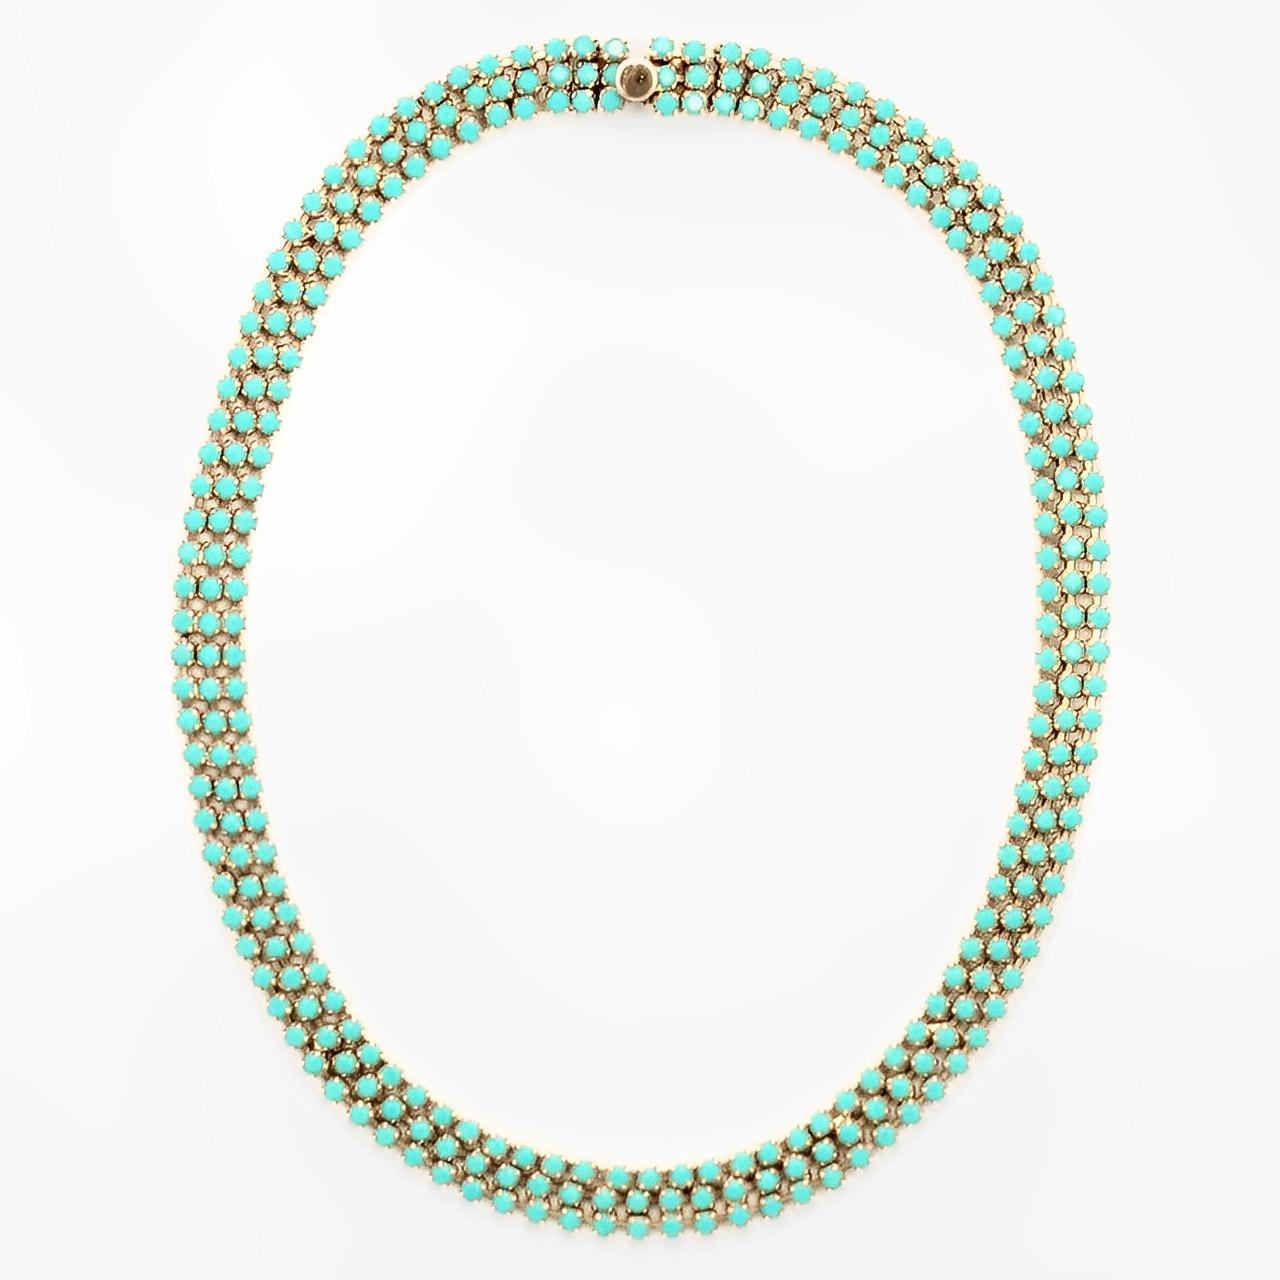 Beautiful gold plated necklace with three rows of faceted faux turquoise glass stones. Length 42 cm / 16.5 inches by width 9 mm / .35 inch. The necklace is in very good condition, with some scratching and wear to the gold plating as expected.

This